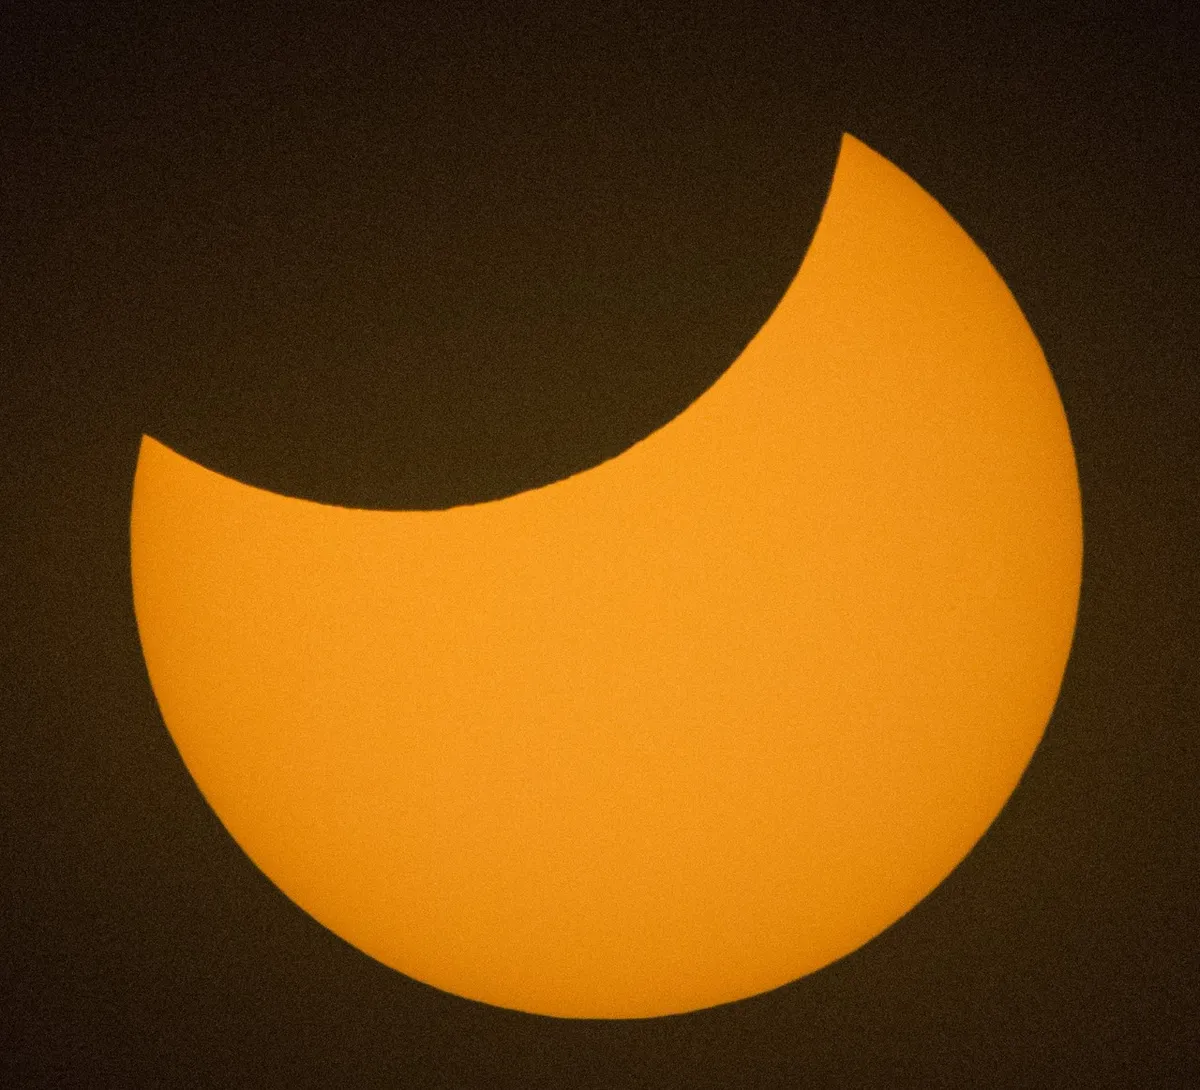 Image of the 10 June 2021 partial solar eclipse